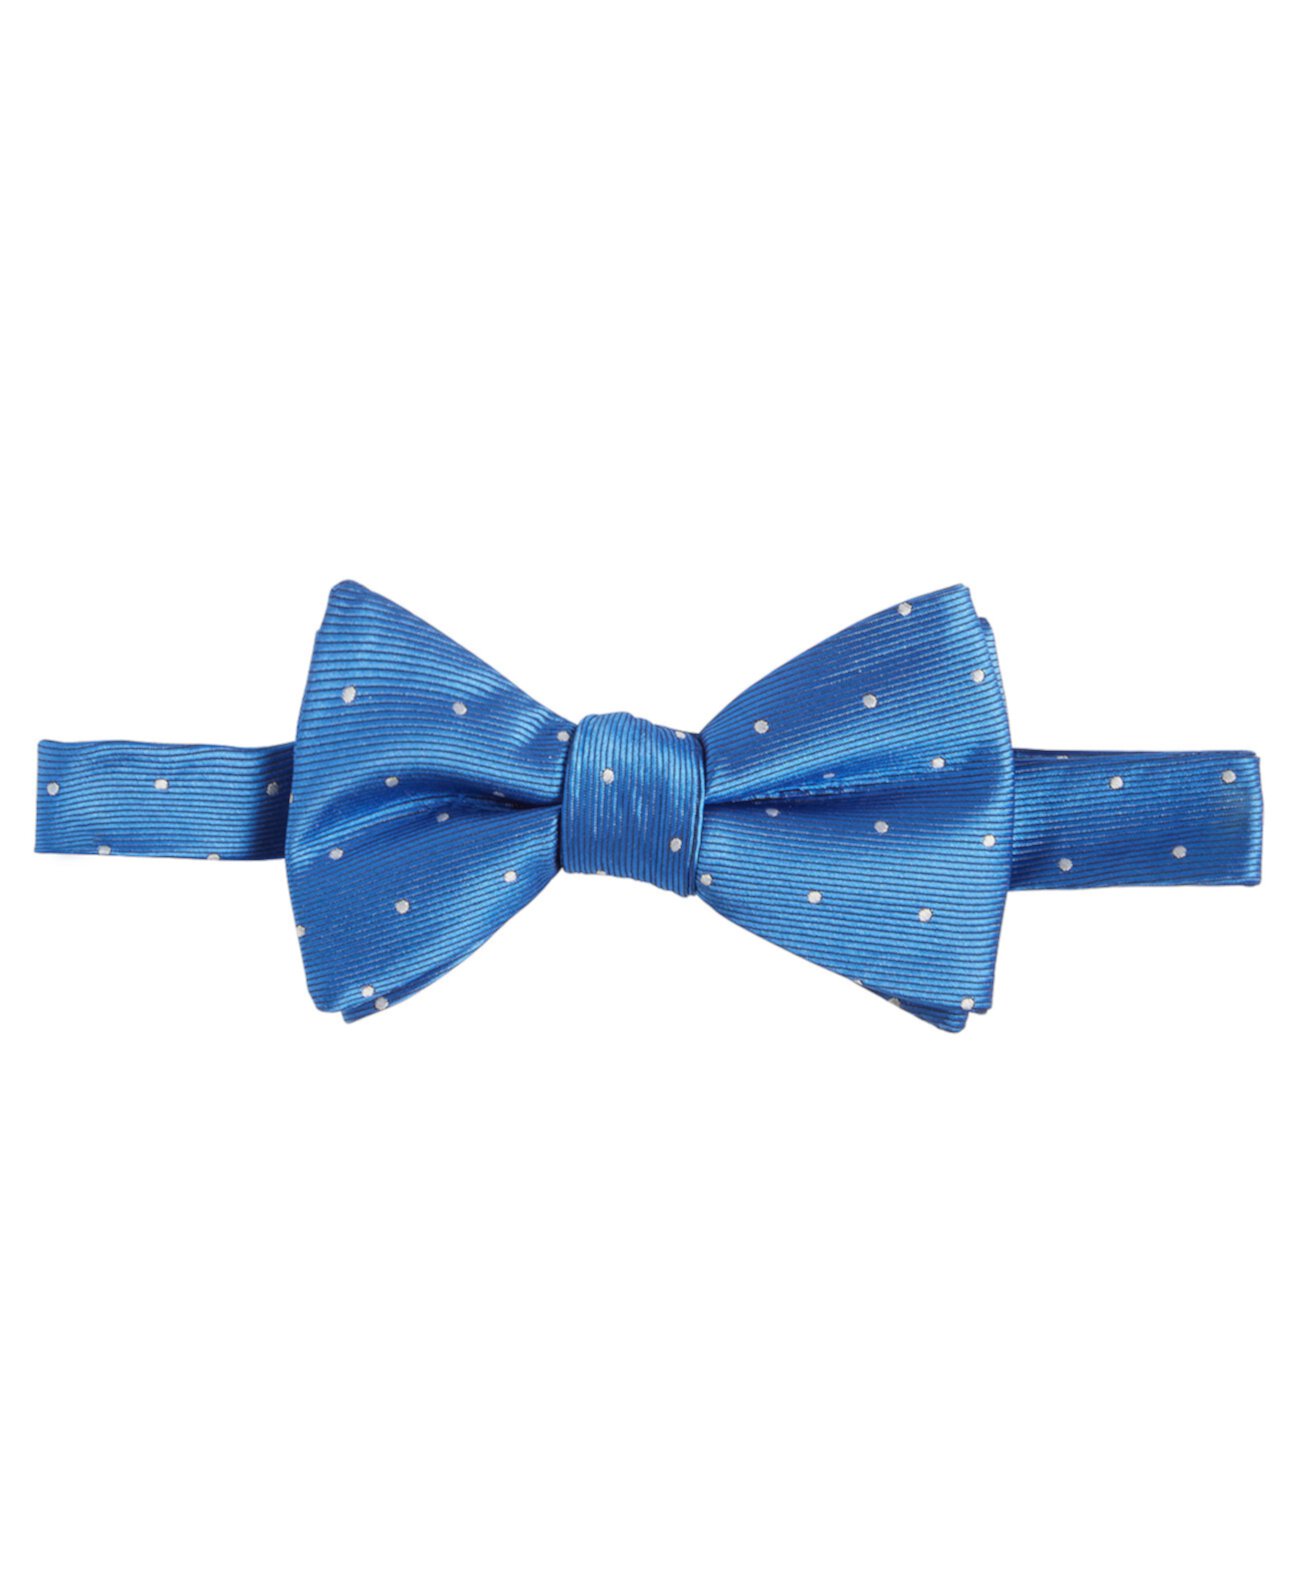 Men's Royal Blue & White Dot Bow Tie Tayion Collection